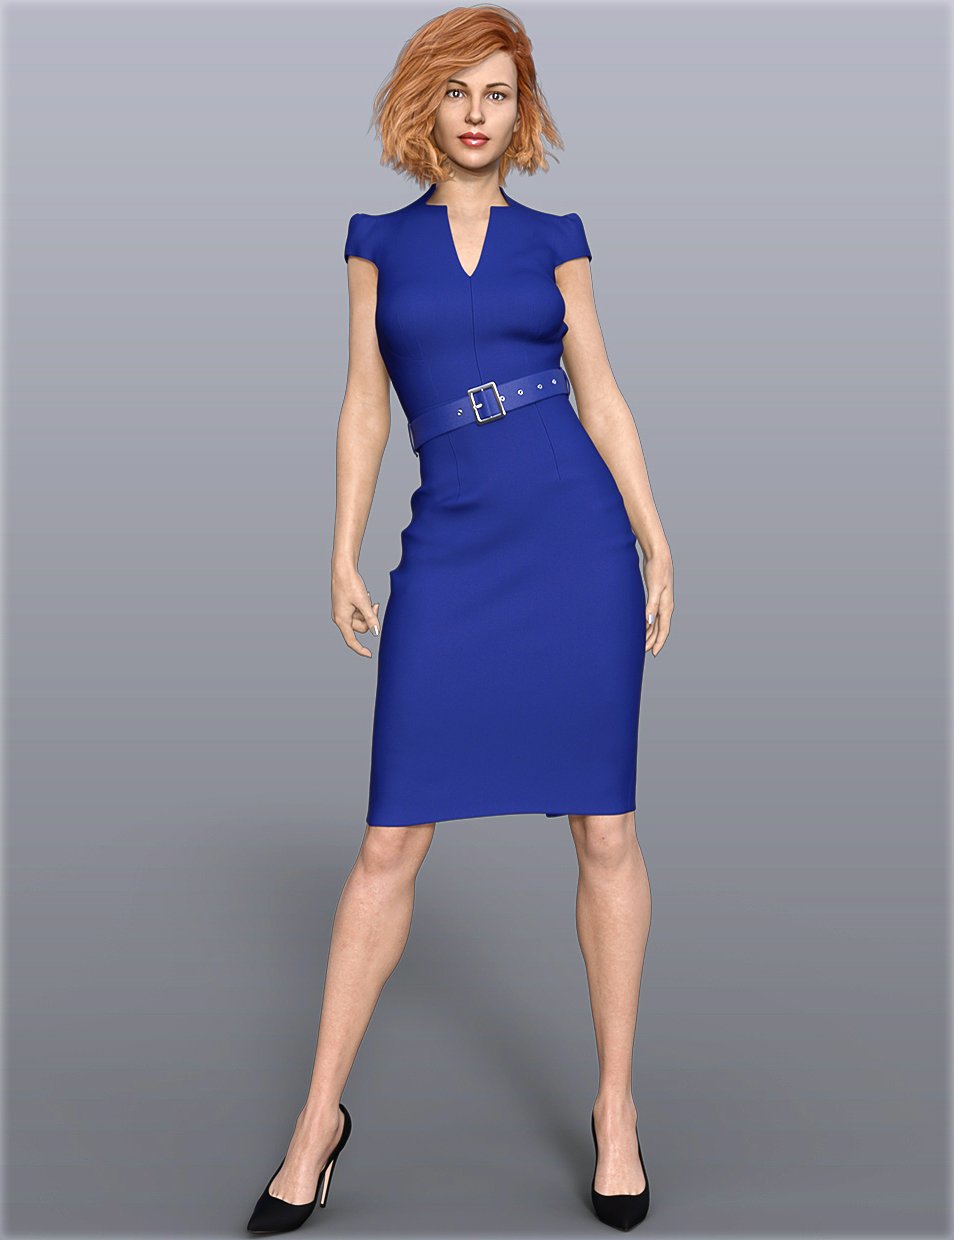 Dforce Handc Belted Office Dress Outfit For Genesis 8 Females Daz 3d 8616